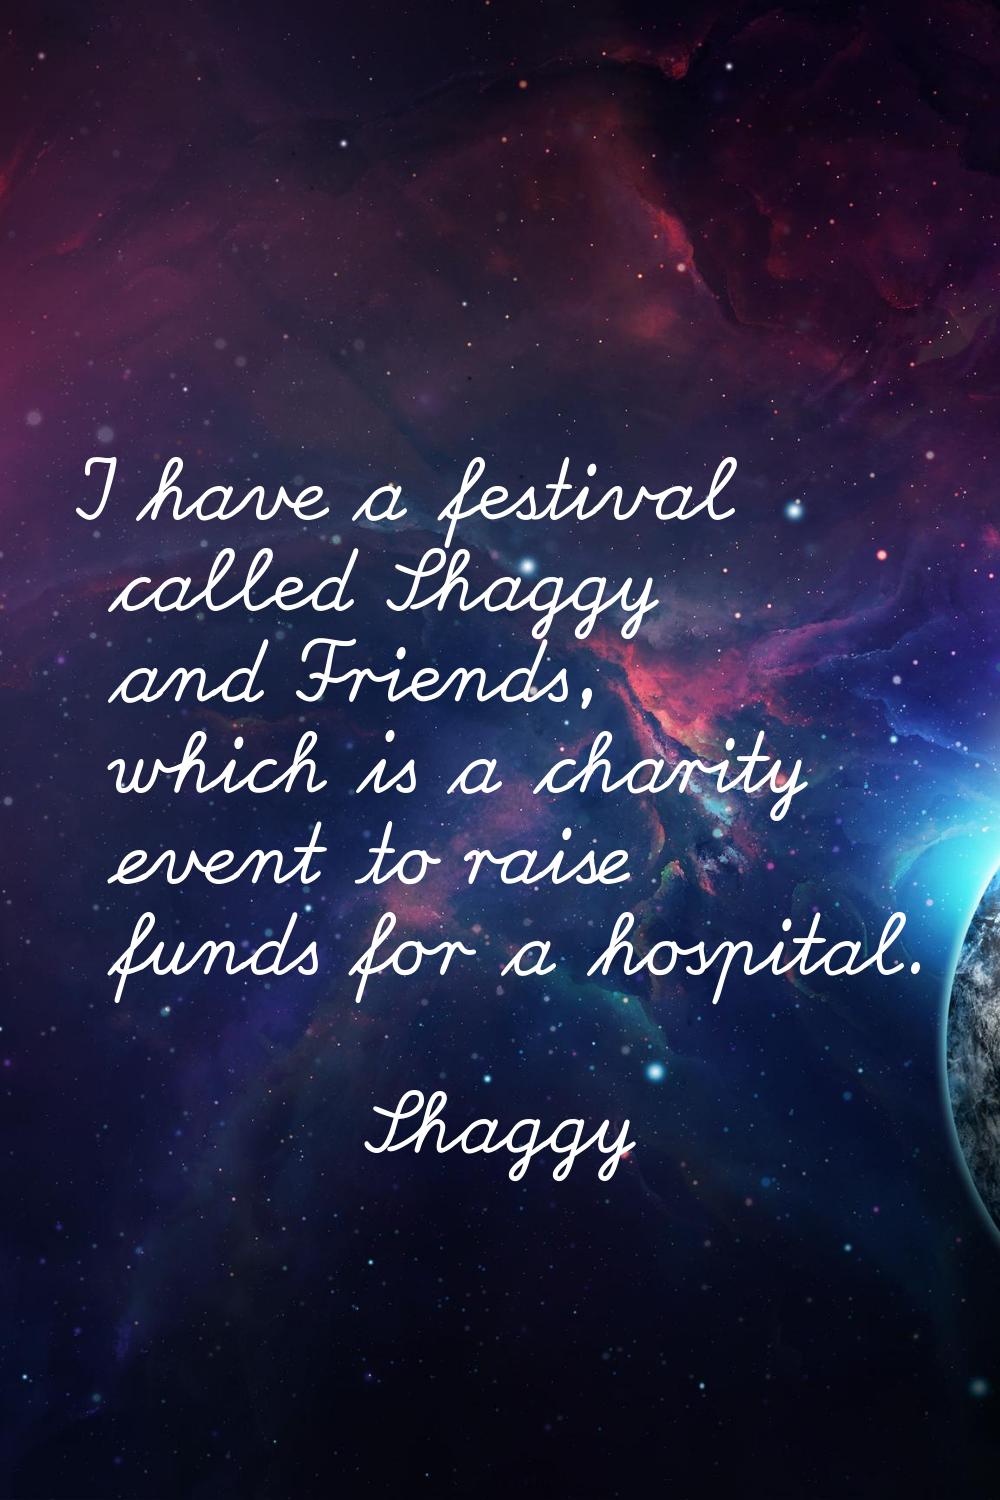 I have a festival called Shaggy and Friends, which is a charity event to raise funds for a hospital